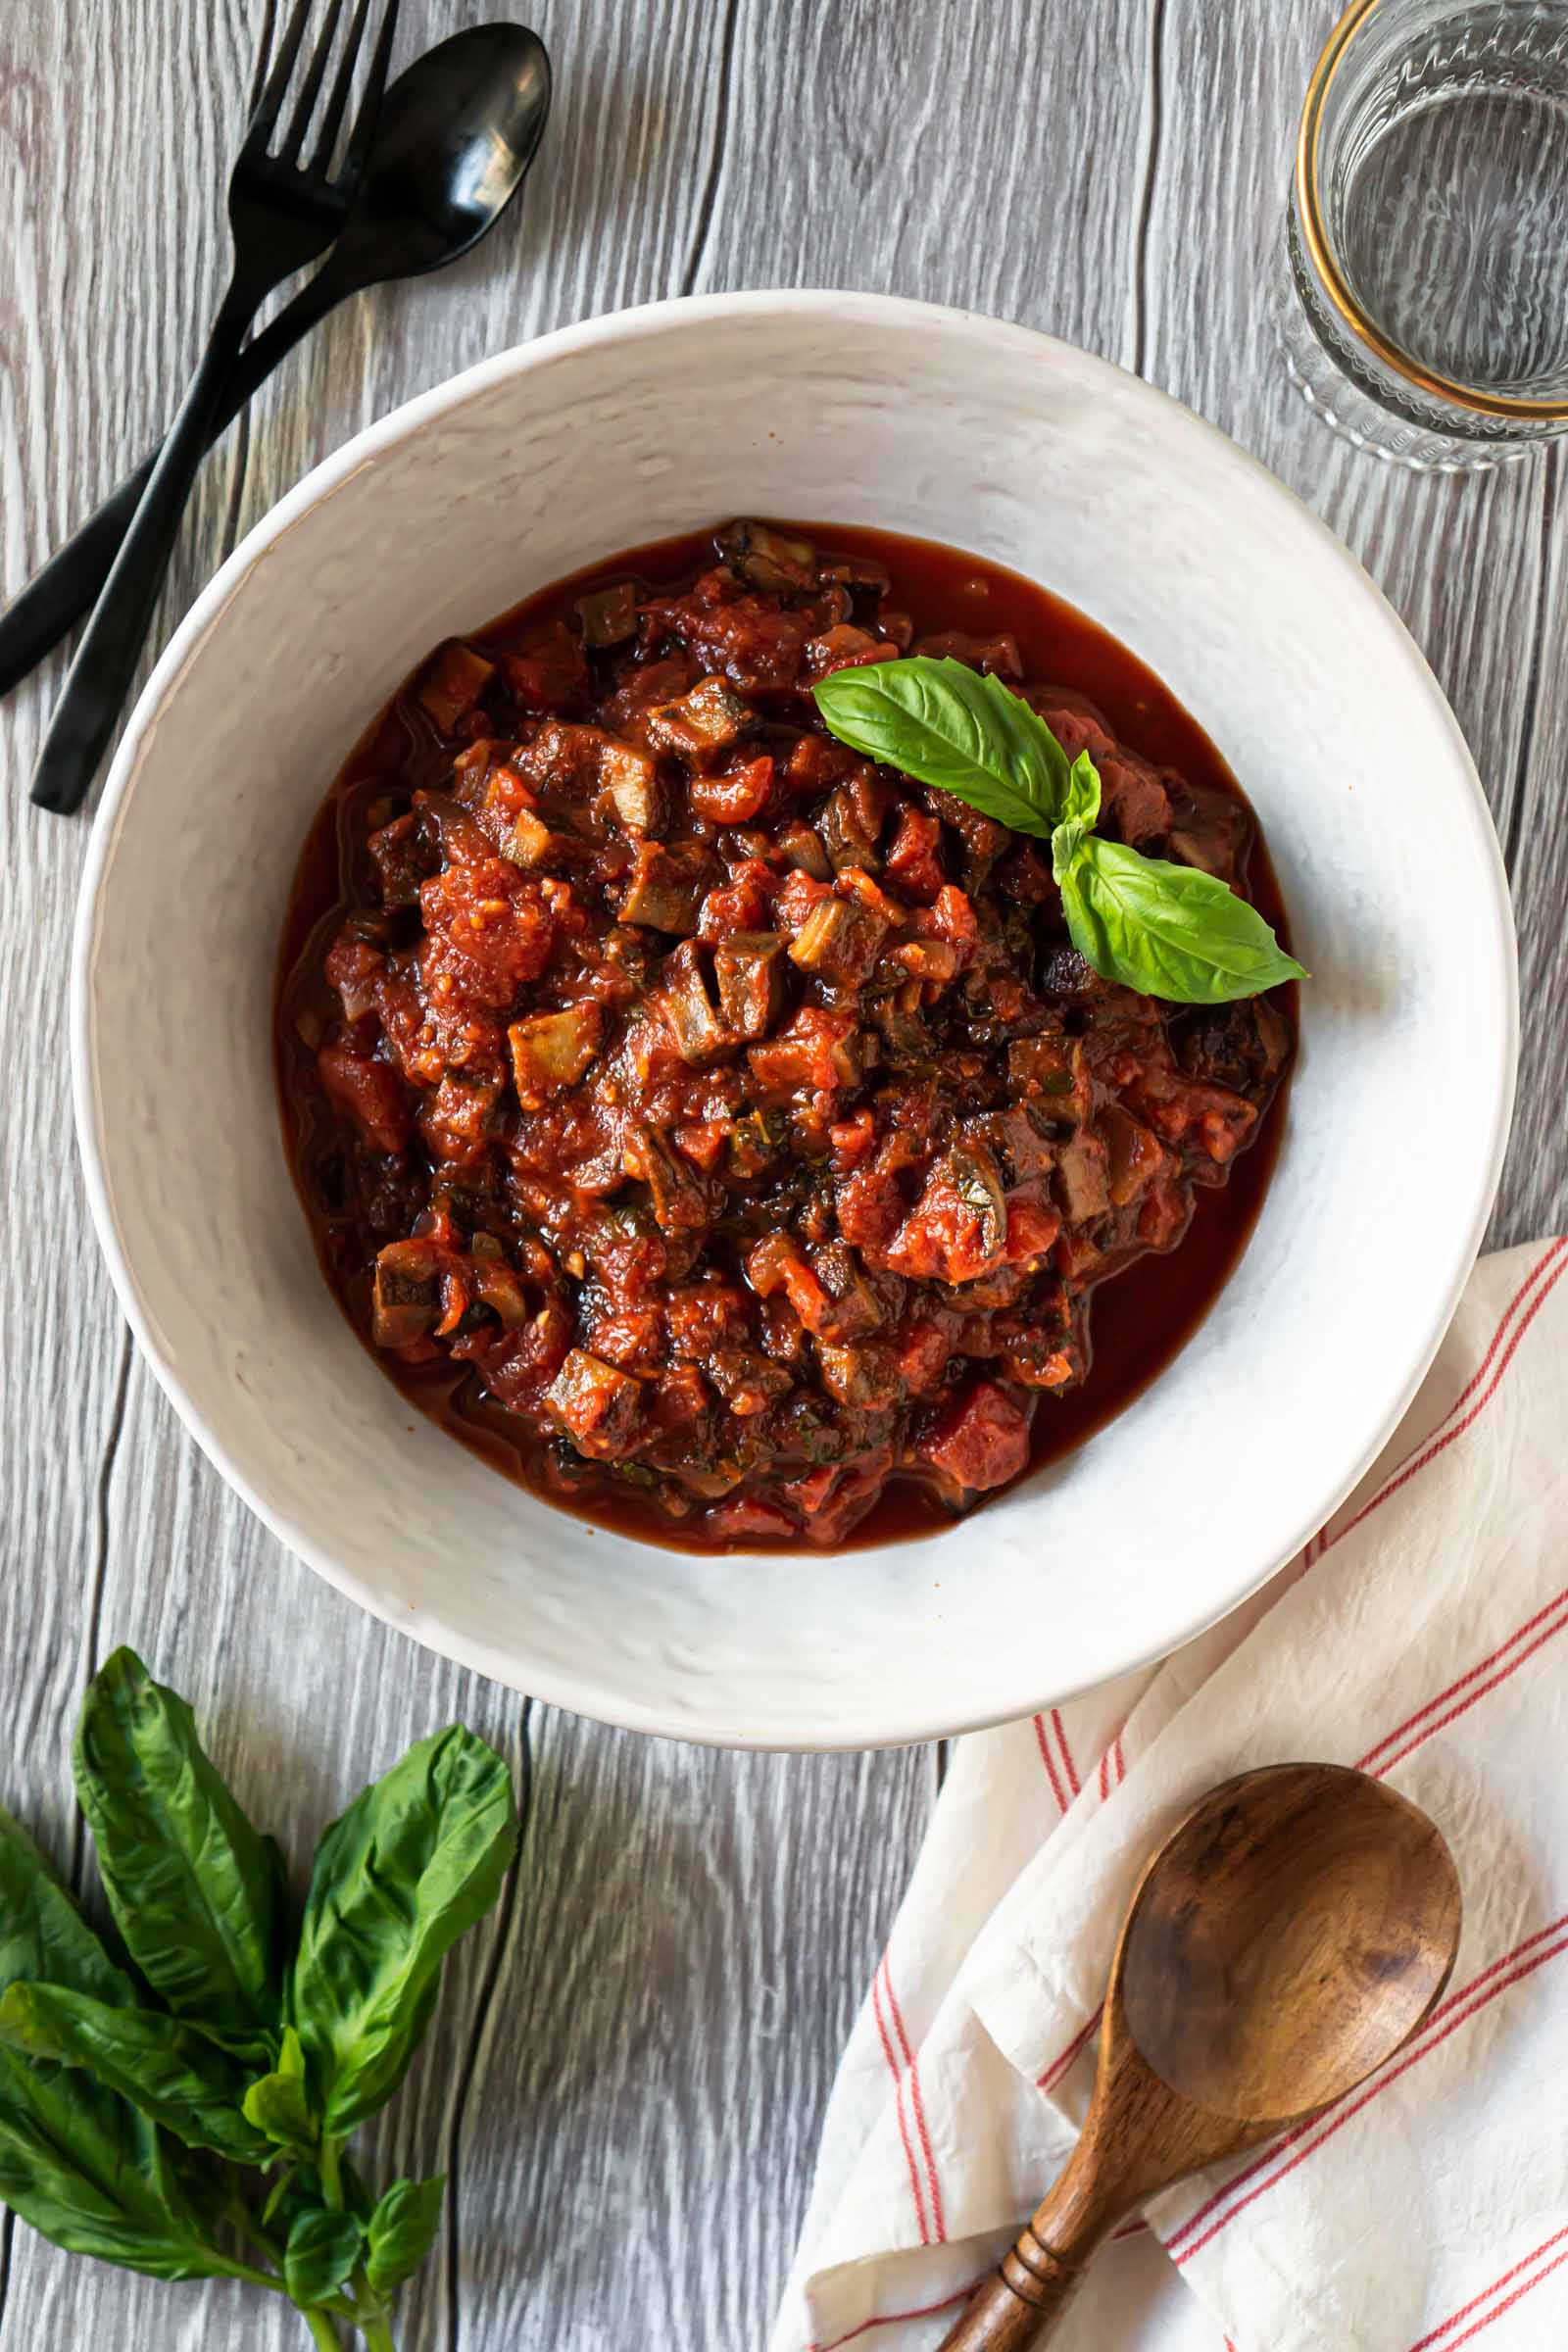 mushroom bolognese sauce in a large white bowl and fresh basil